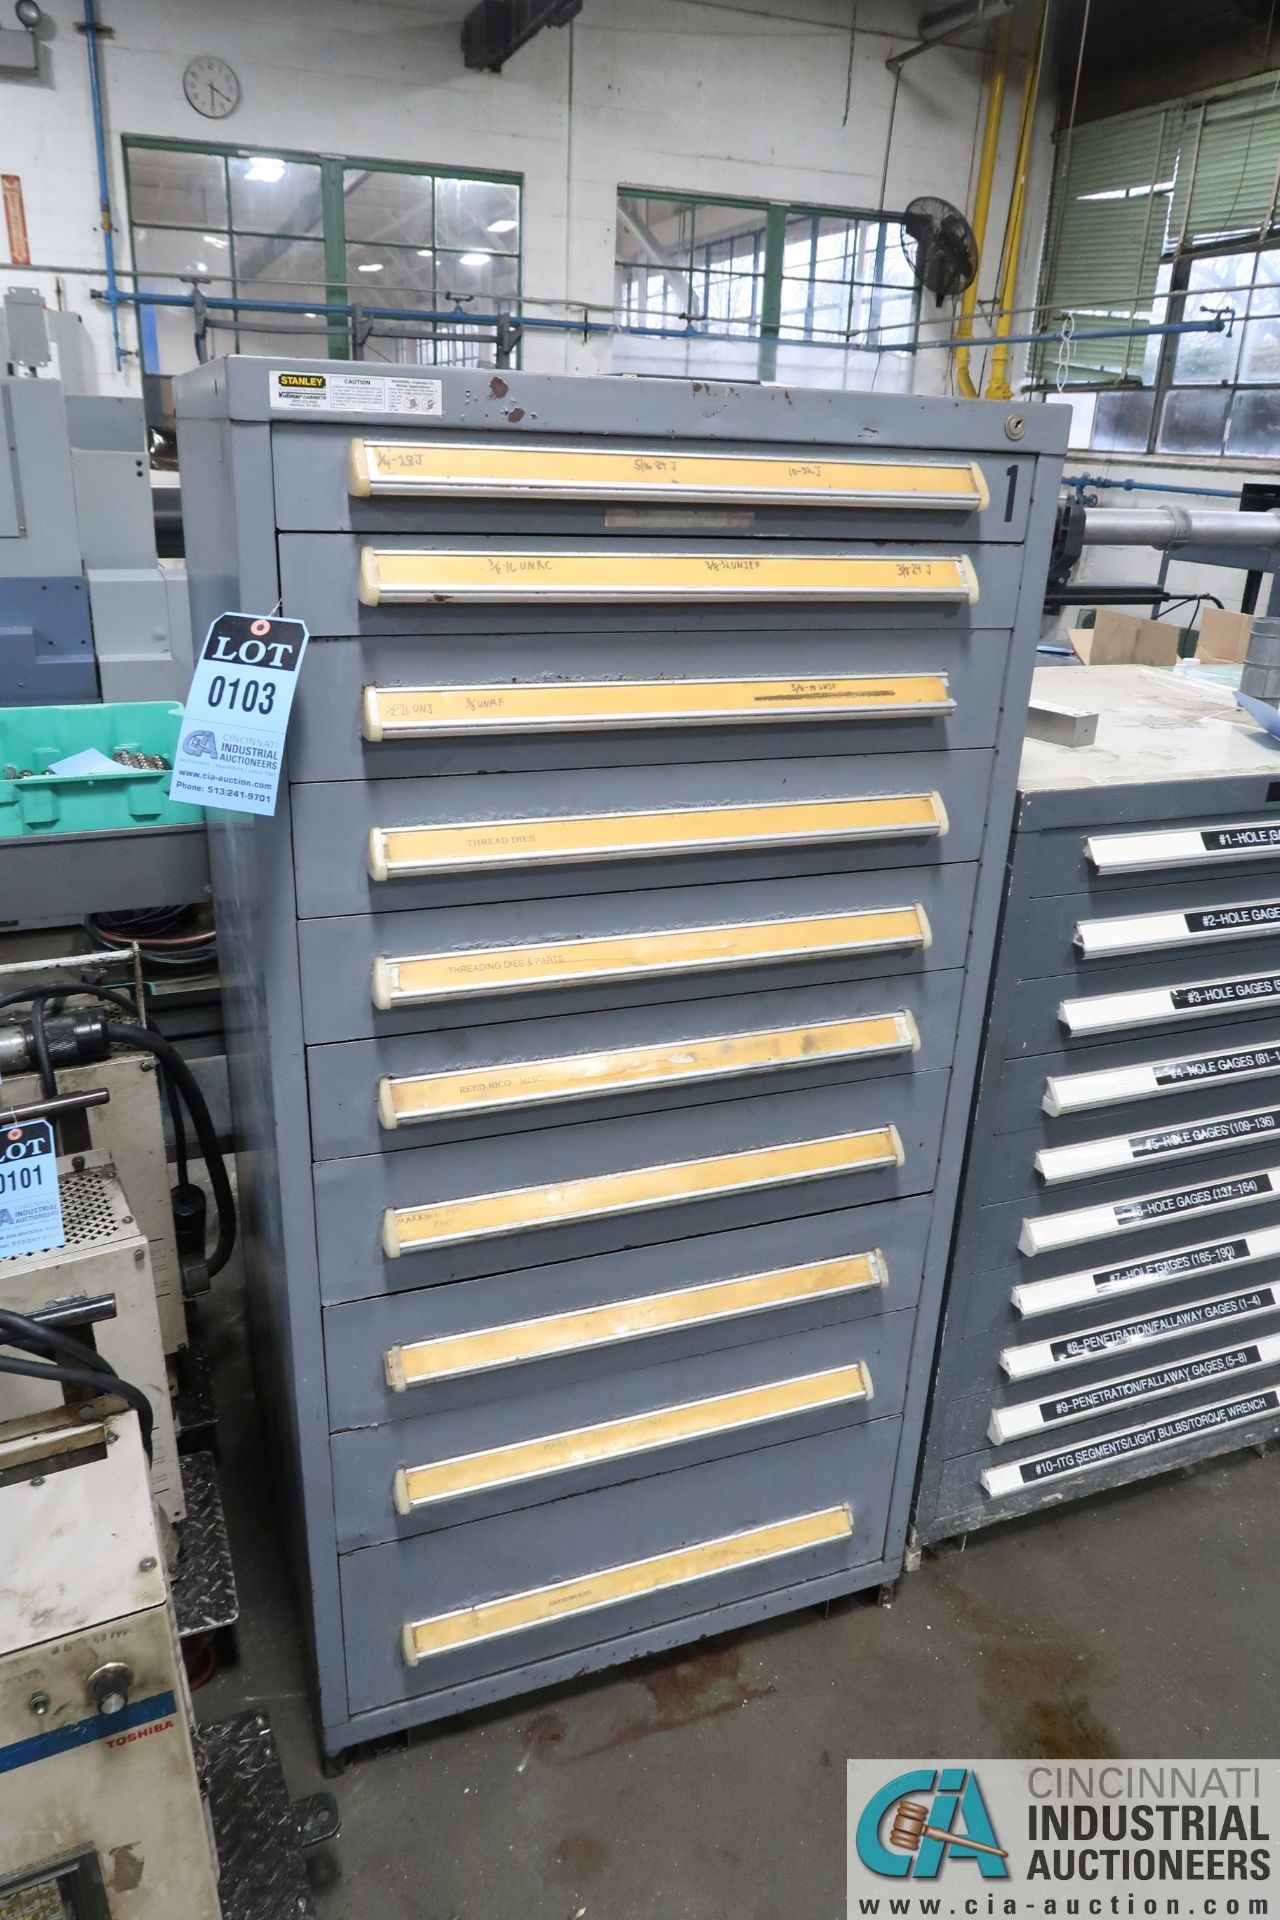 10-DRAWER VIDMAR CABINET - Loading fee due the “ERRA” Pedowitz Machinery Movers $50.00, pricing